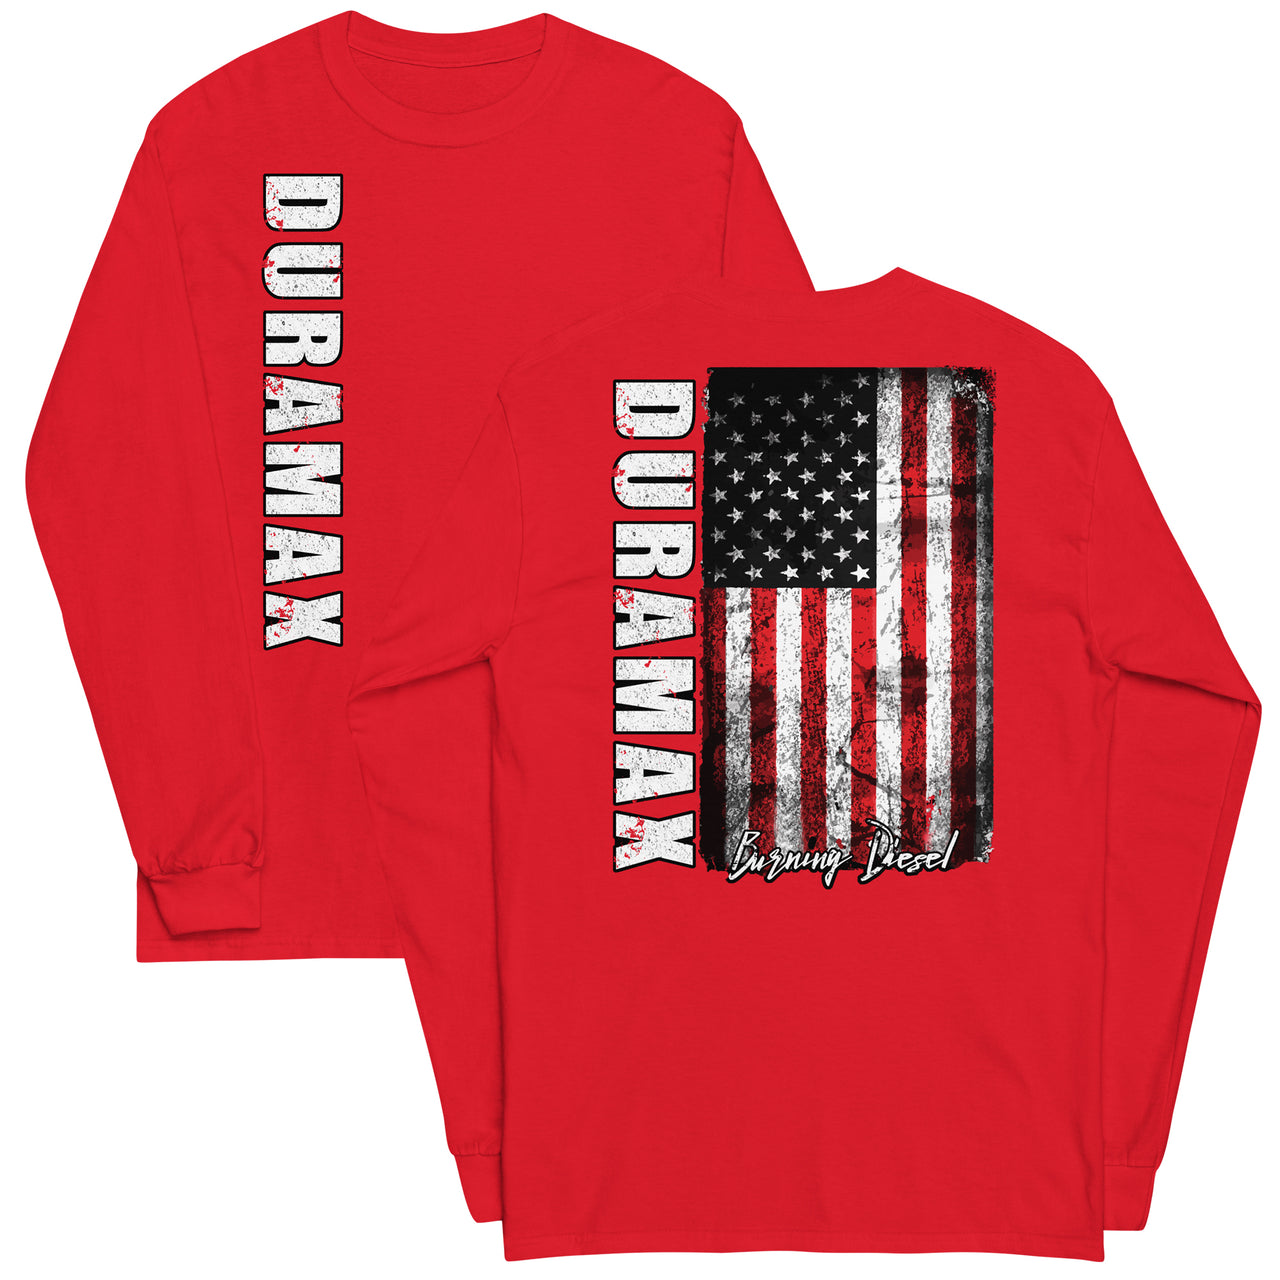 Duramax Shirt With American Flag Design Mens Long Sleeve T-Shirt in red